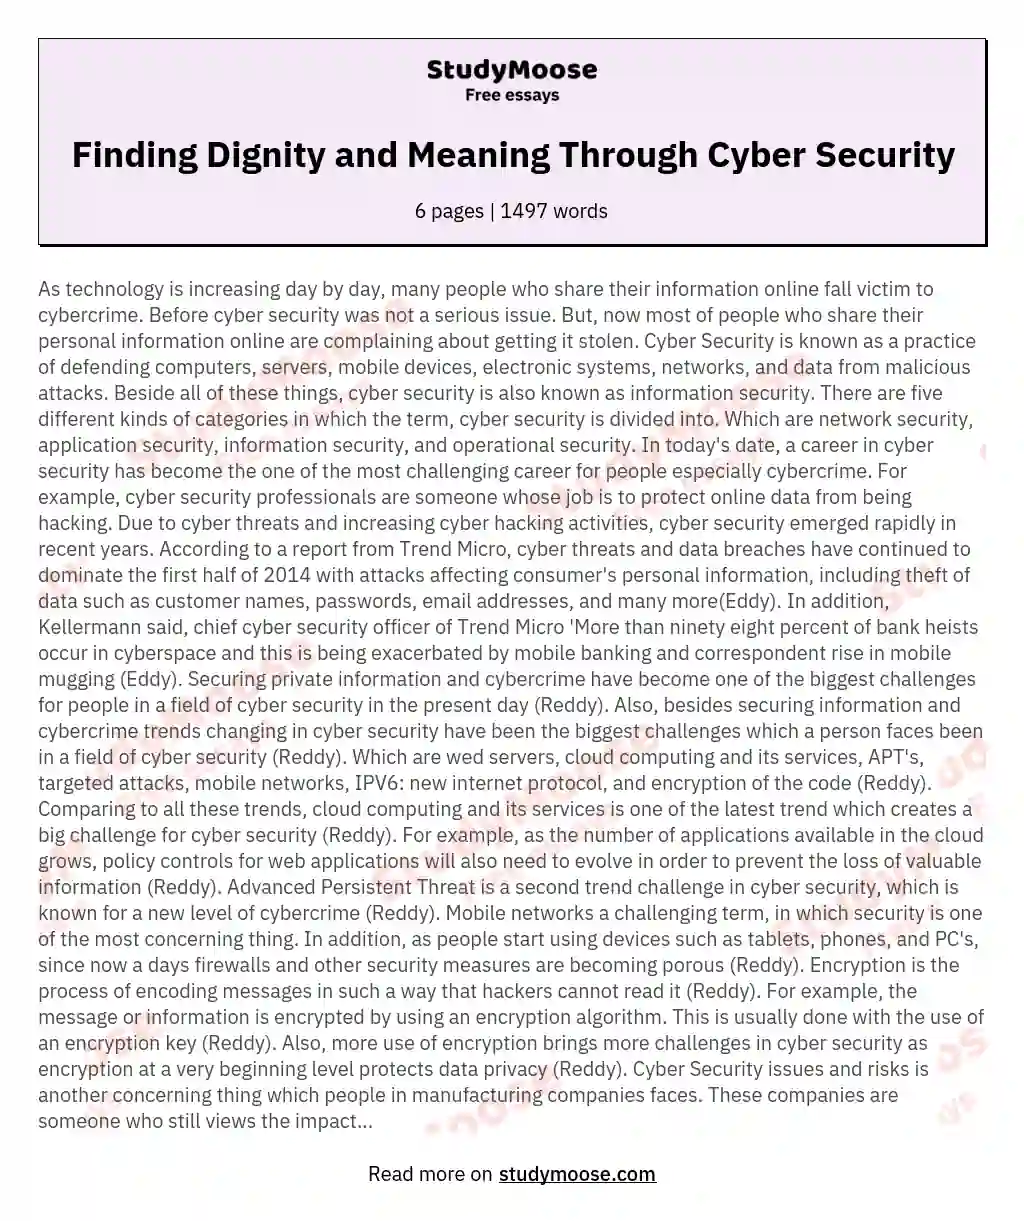 Finding Dignity and Meaning Through Cyber Security essay